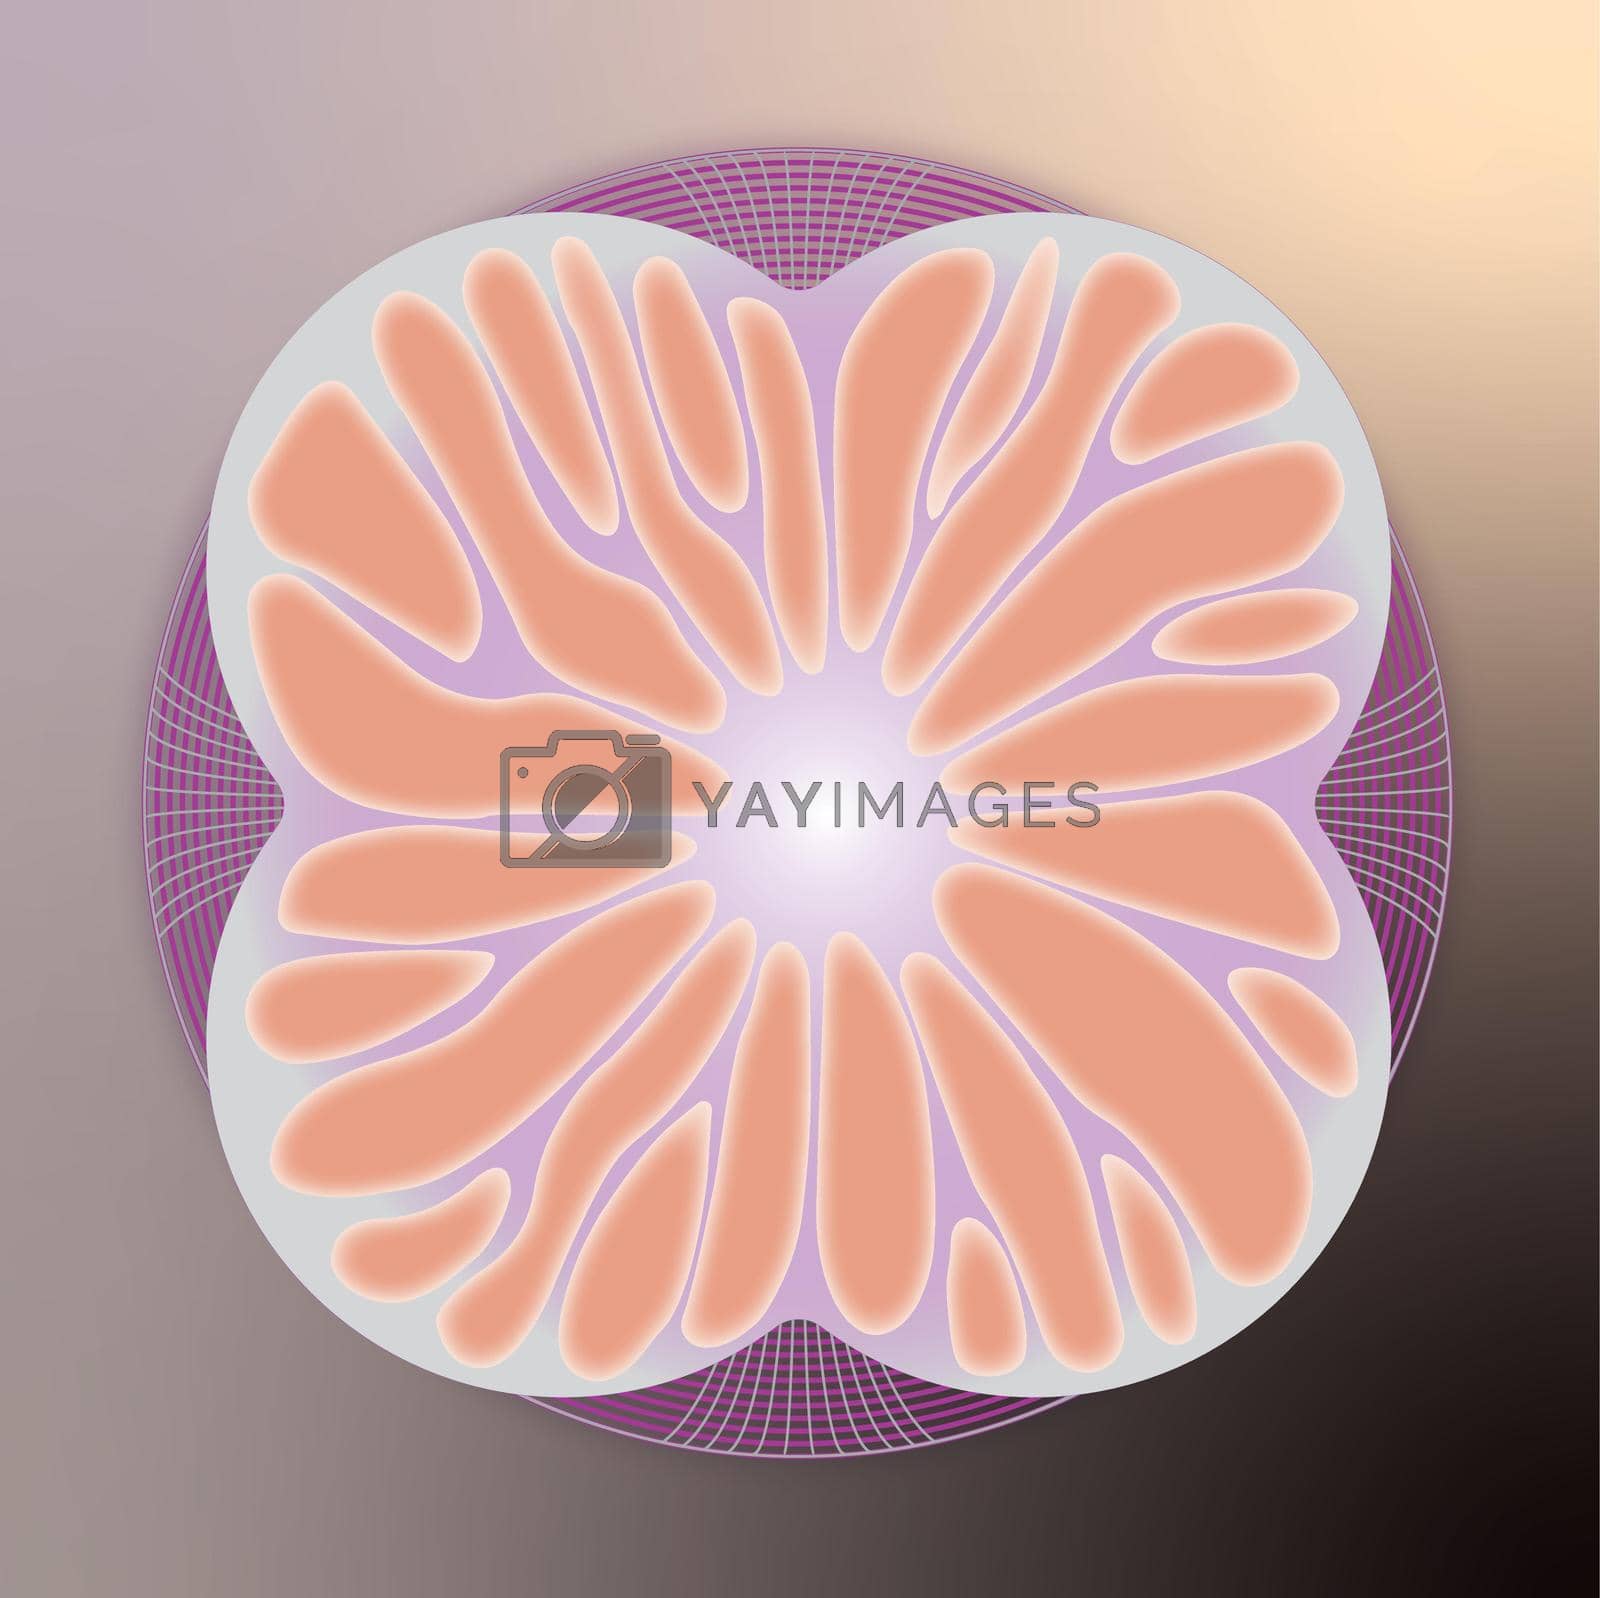 Royalty free image of Abstract figure in purple-orange tones by ArtBIN